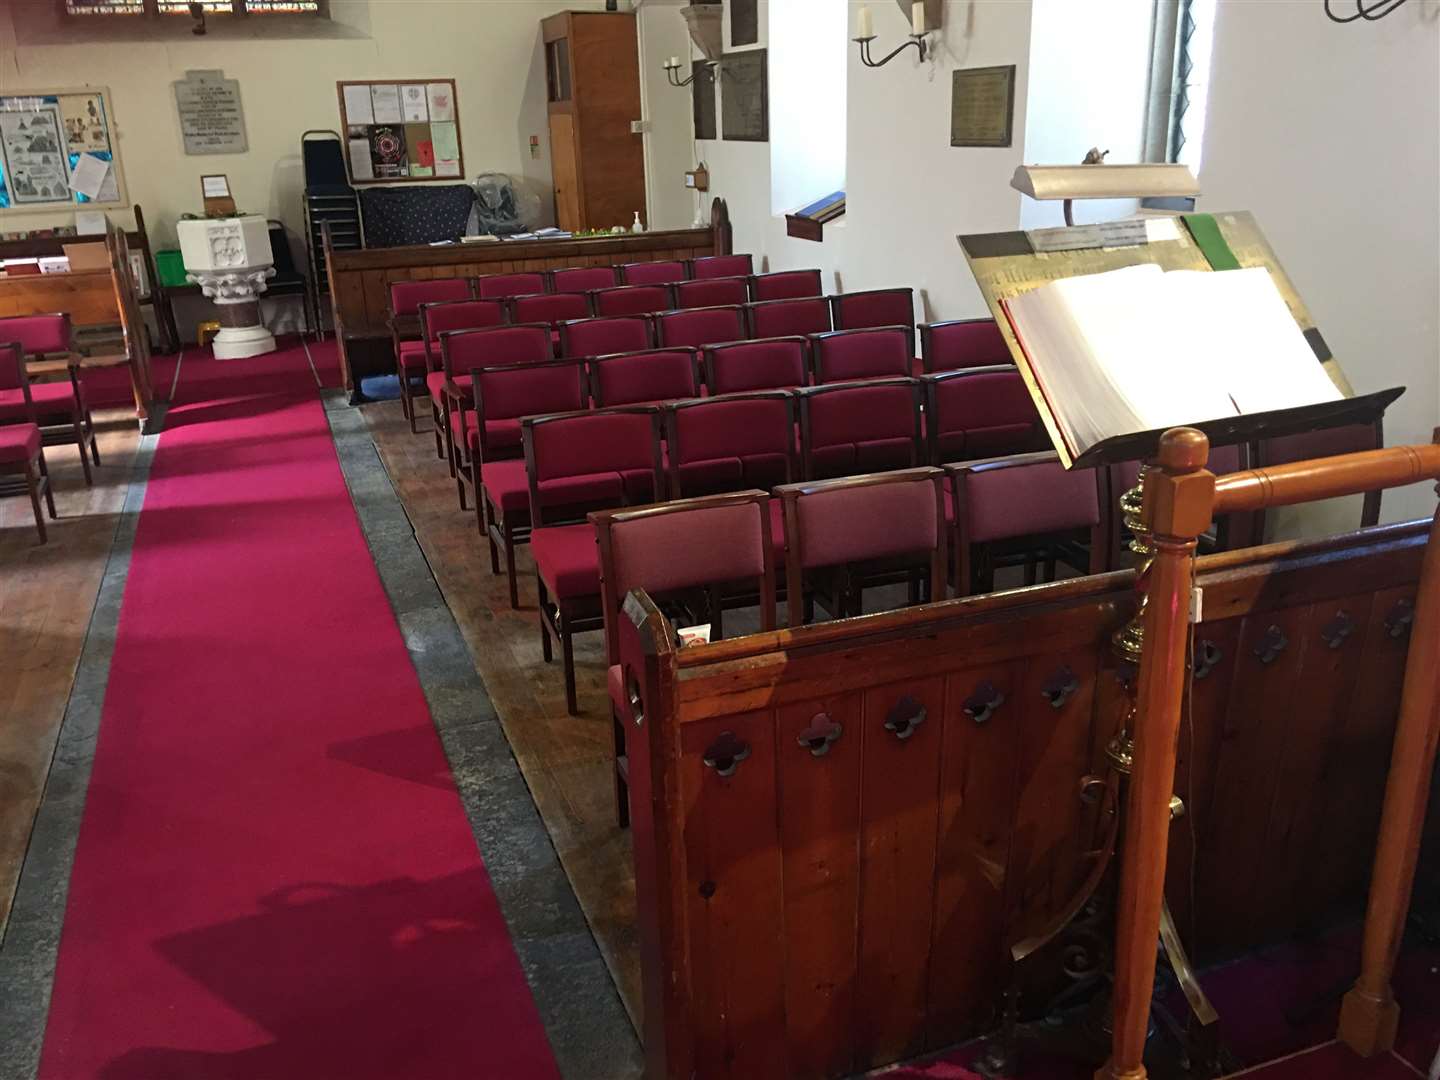 The chairs in place within St John's Episcopal Church in Wick.